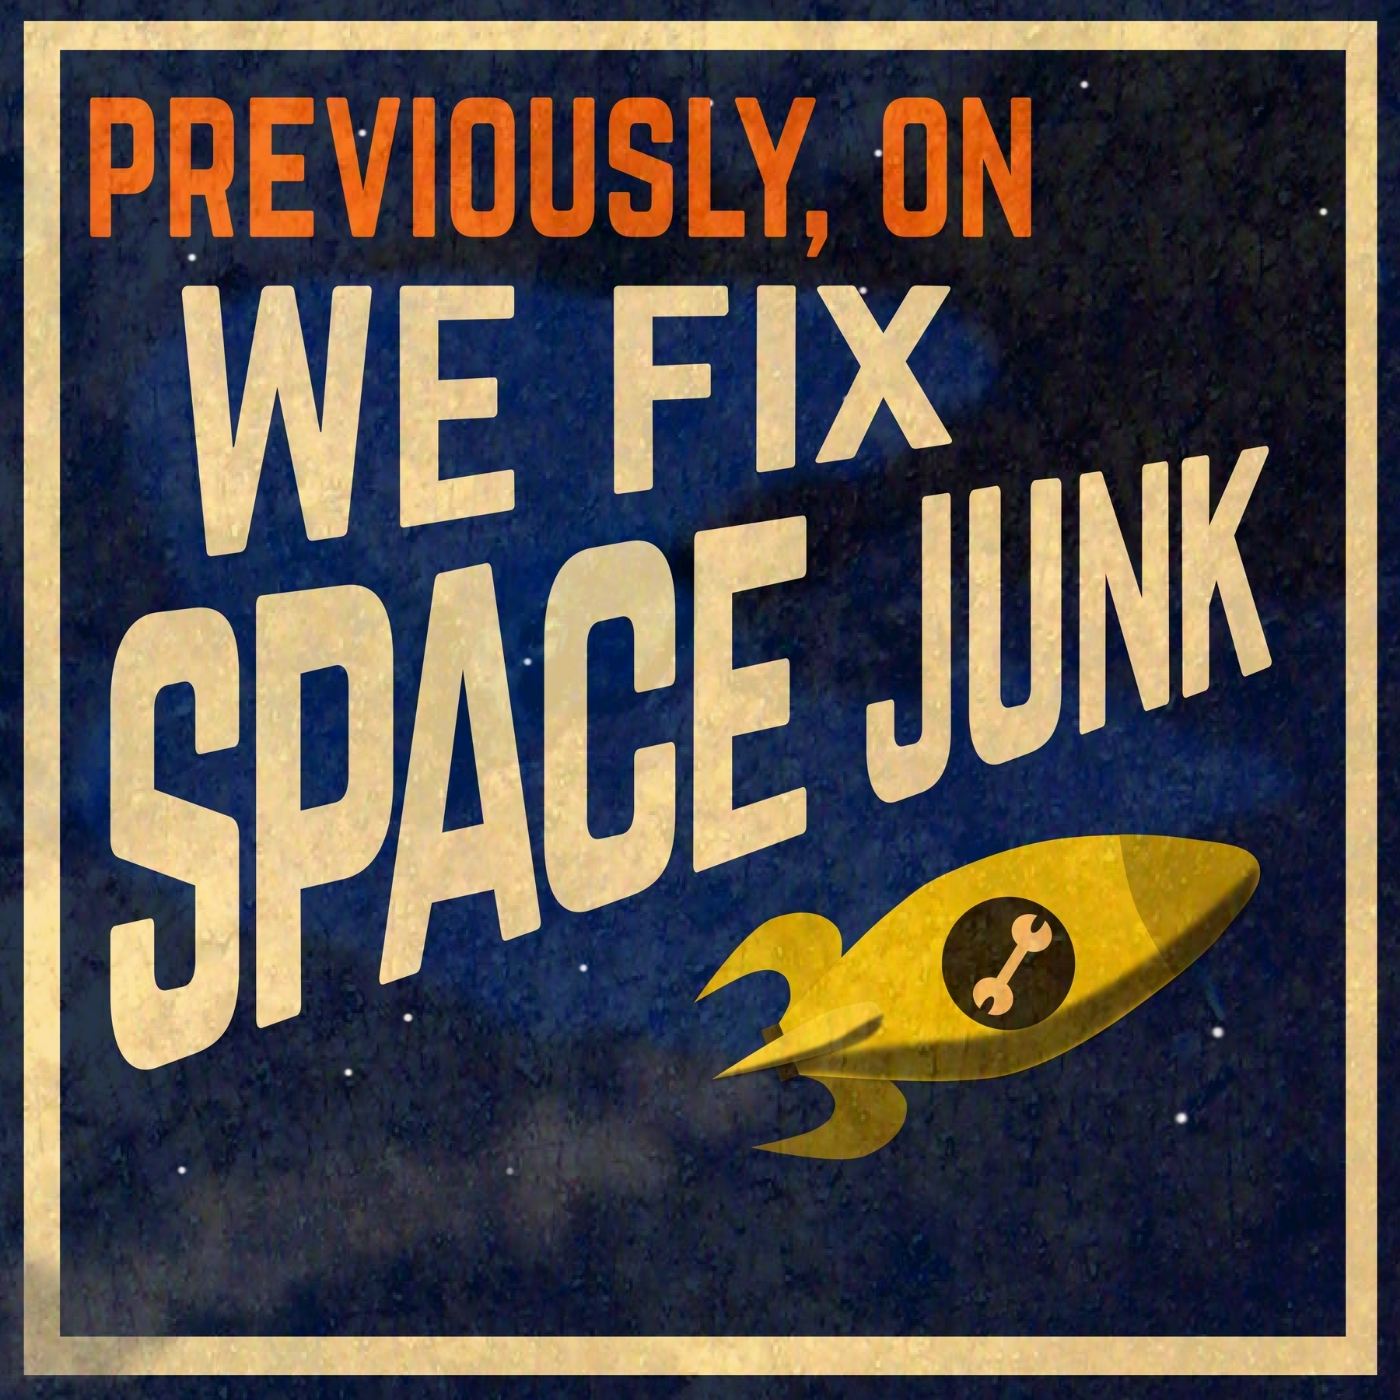 cover art for Previously, on We Fix Space Junk